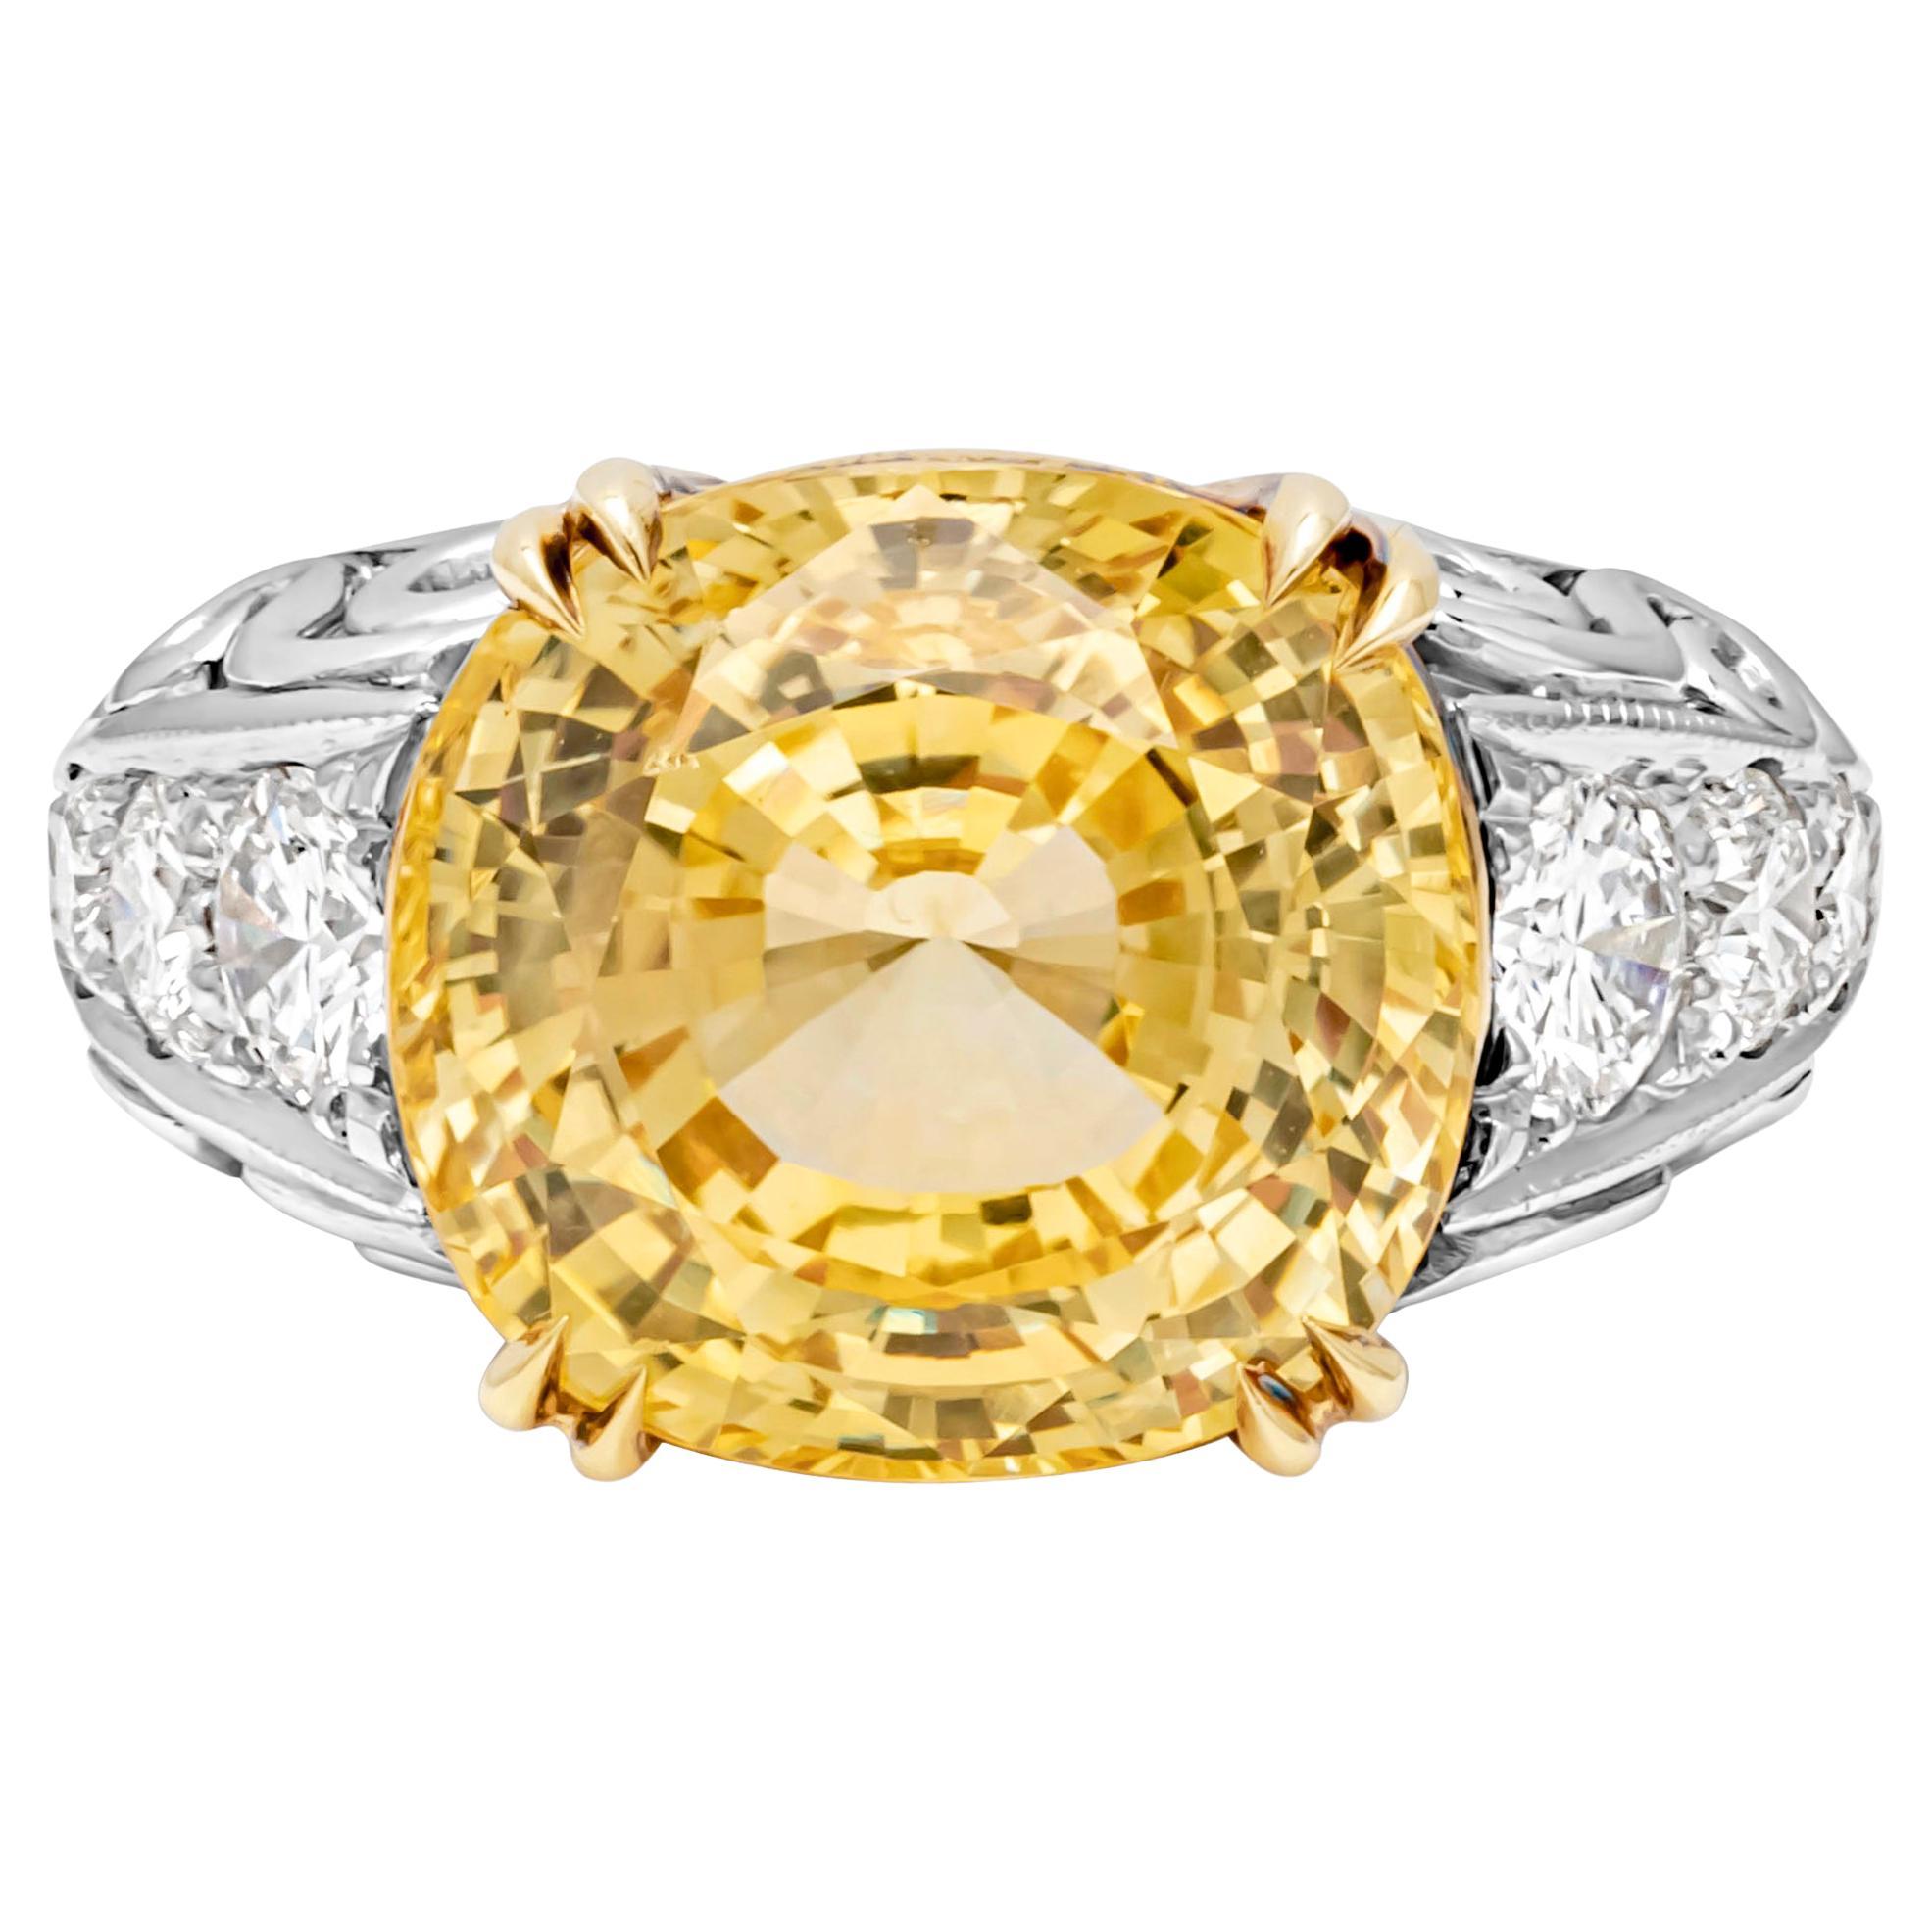 This splendid and luminous fashion ring showcases a 13.01 carats cushion cut certified by GIA as yellow sapphire no indications of heat treatment, set in a timeless eight prong basket setting. Accented by 6 brilliant round diamonds on each side